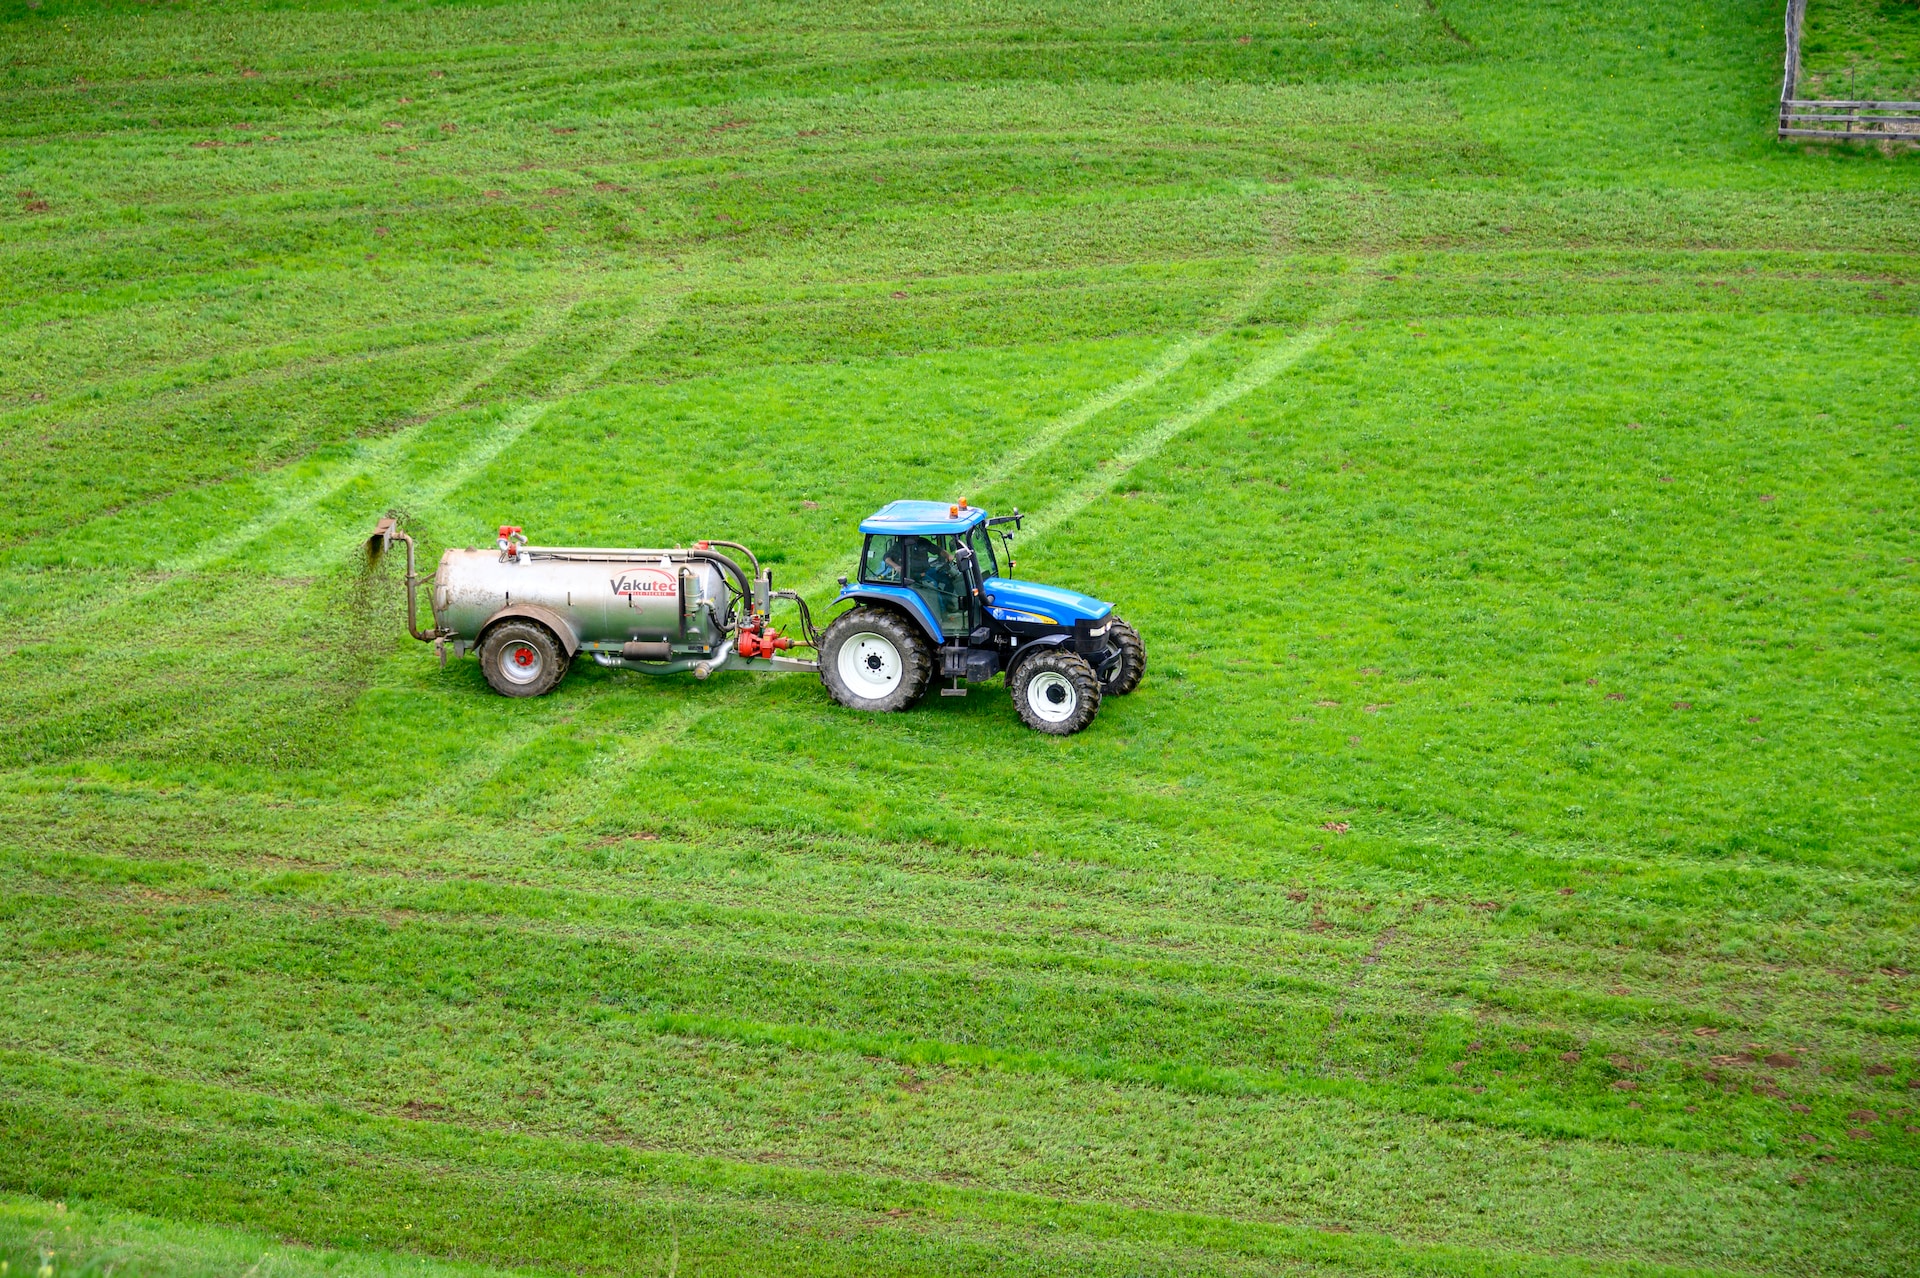 Blue tractor towing a tank spreading fertilizer on a green grass field